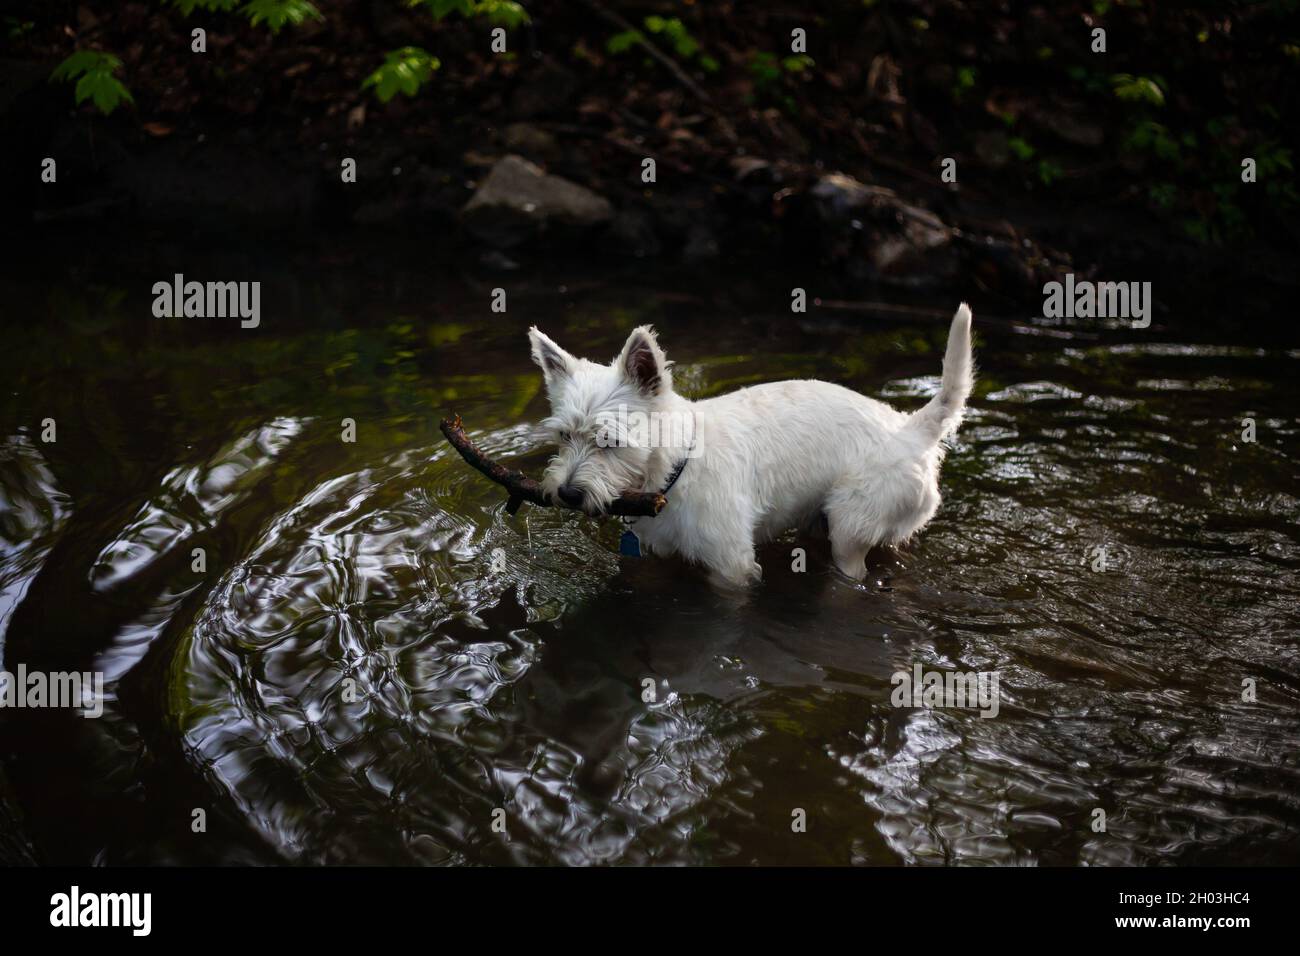 West highland white terrier dog playing with the stick in river | White dog holding stick in mouth standing  in flowing water top down view photo Stock Photo